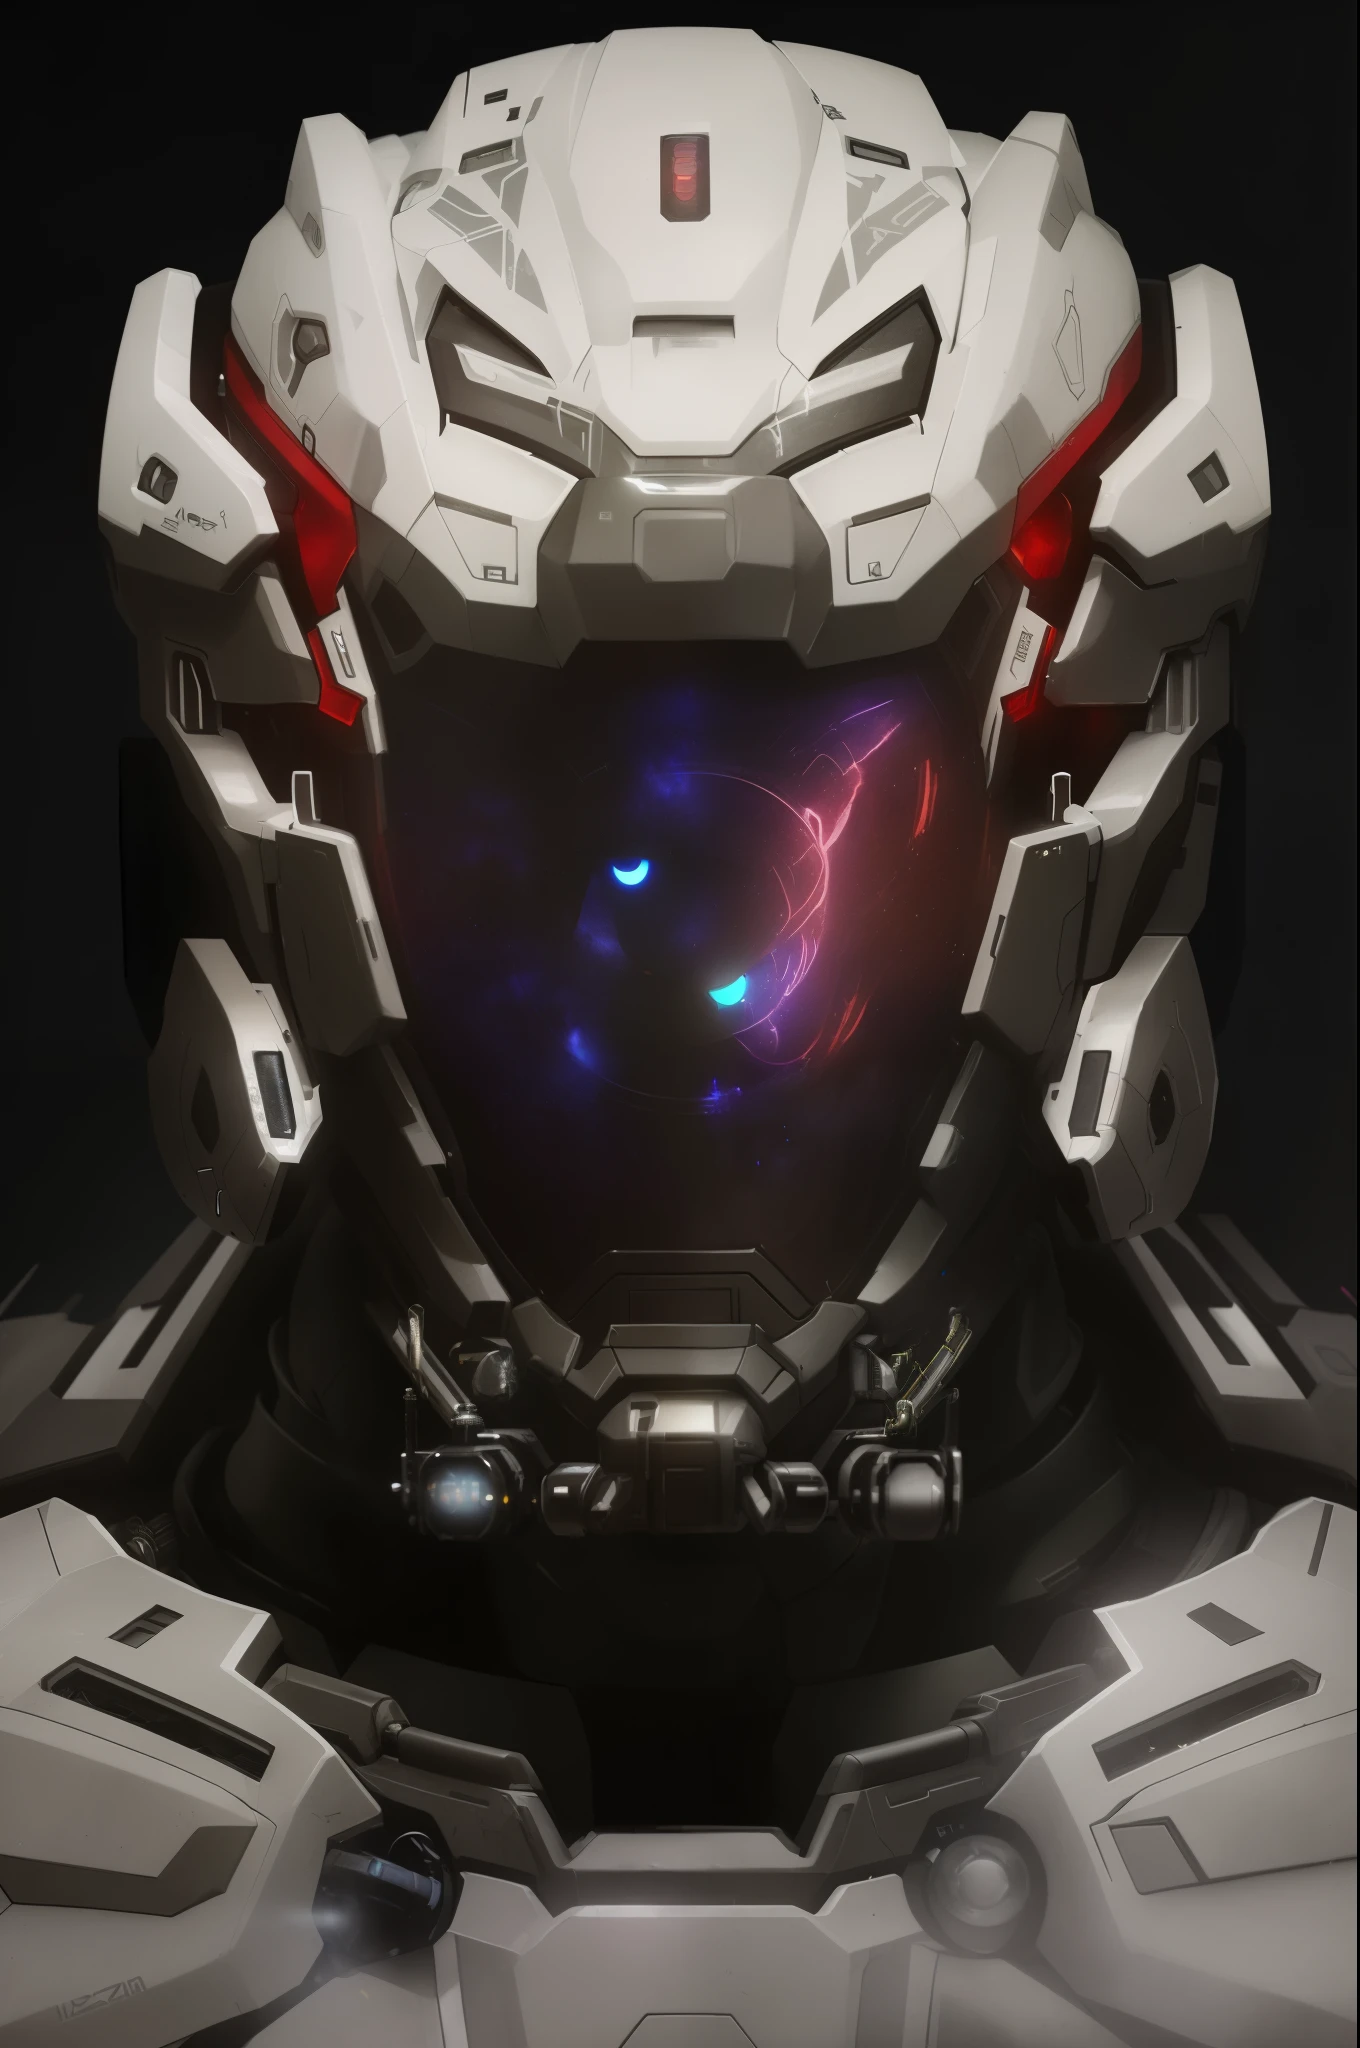 a close up of a futuristic helmet with a glowing eye, portrait of a space cyborg, portrait of a mech, eyes projected onto visor, detailed sci-fi art, symmetrical portrait scifi, star citizen halo, dark sci-fi art, anfas portrait of a mech warrior, cyborg portrait, epic sci-fi character art, epic sci - fi character art